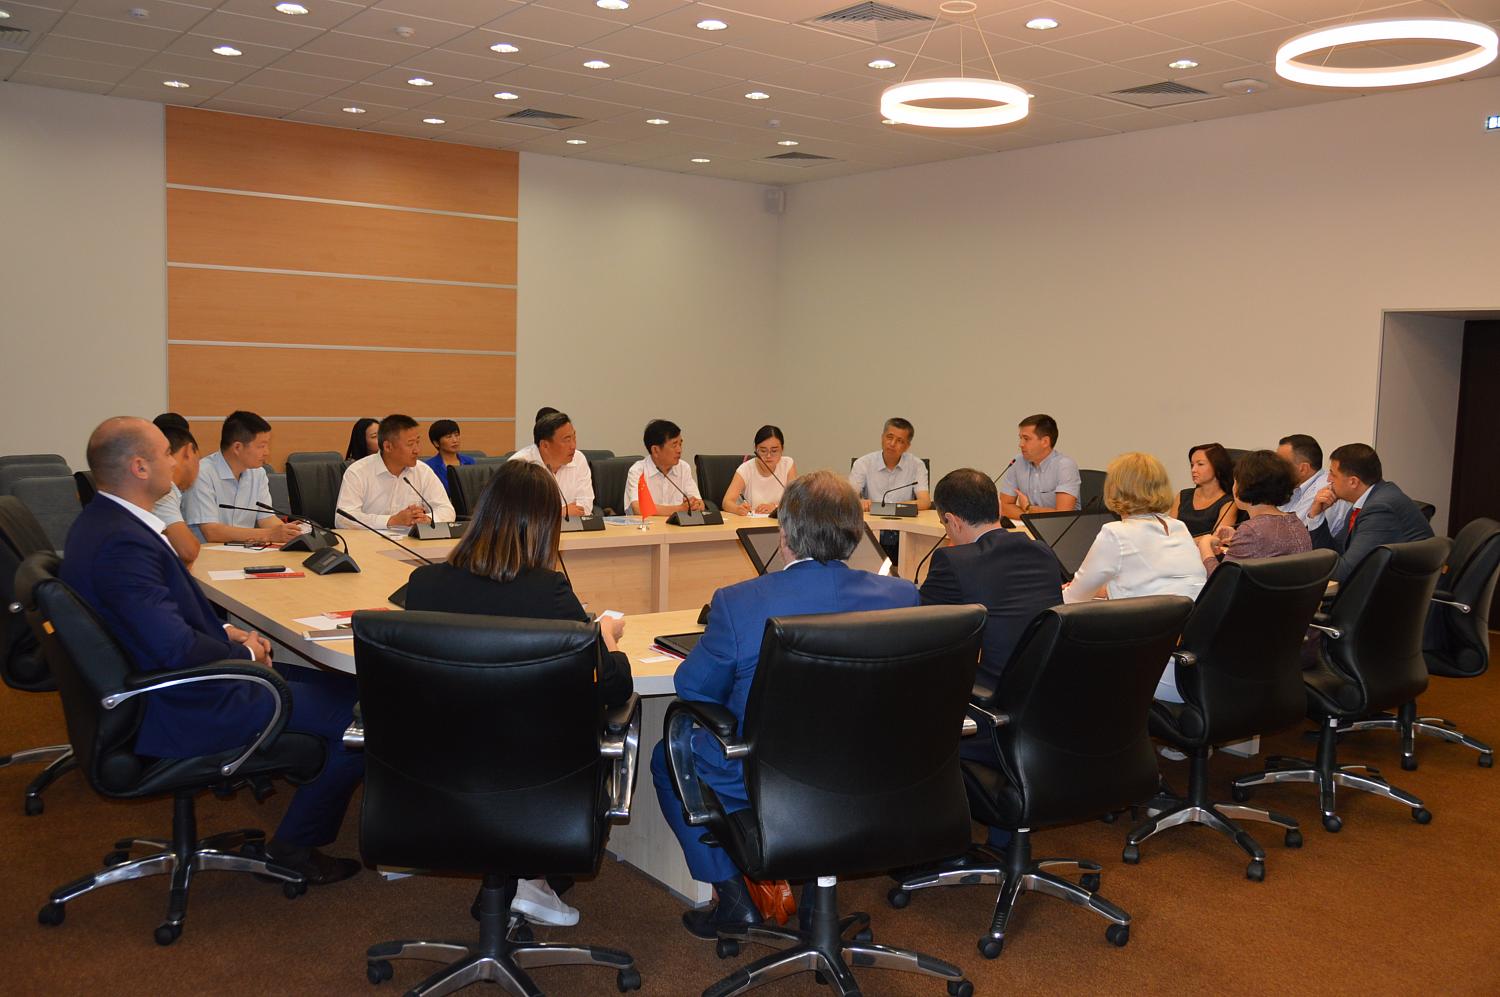 MCCI provided venue for the meeting of Chinese delegation with Russian entrepreneurs representing the alcohol industry